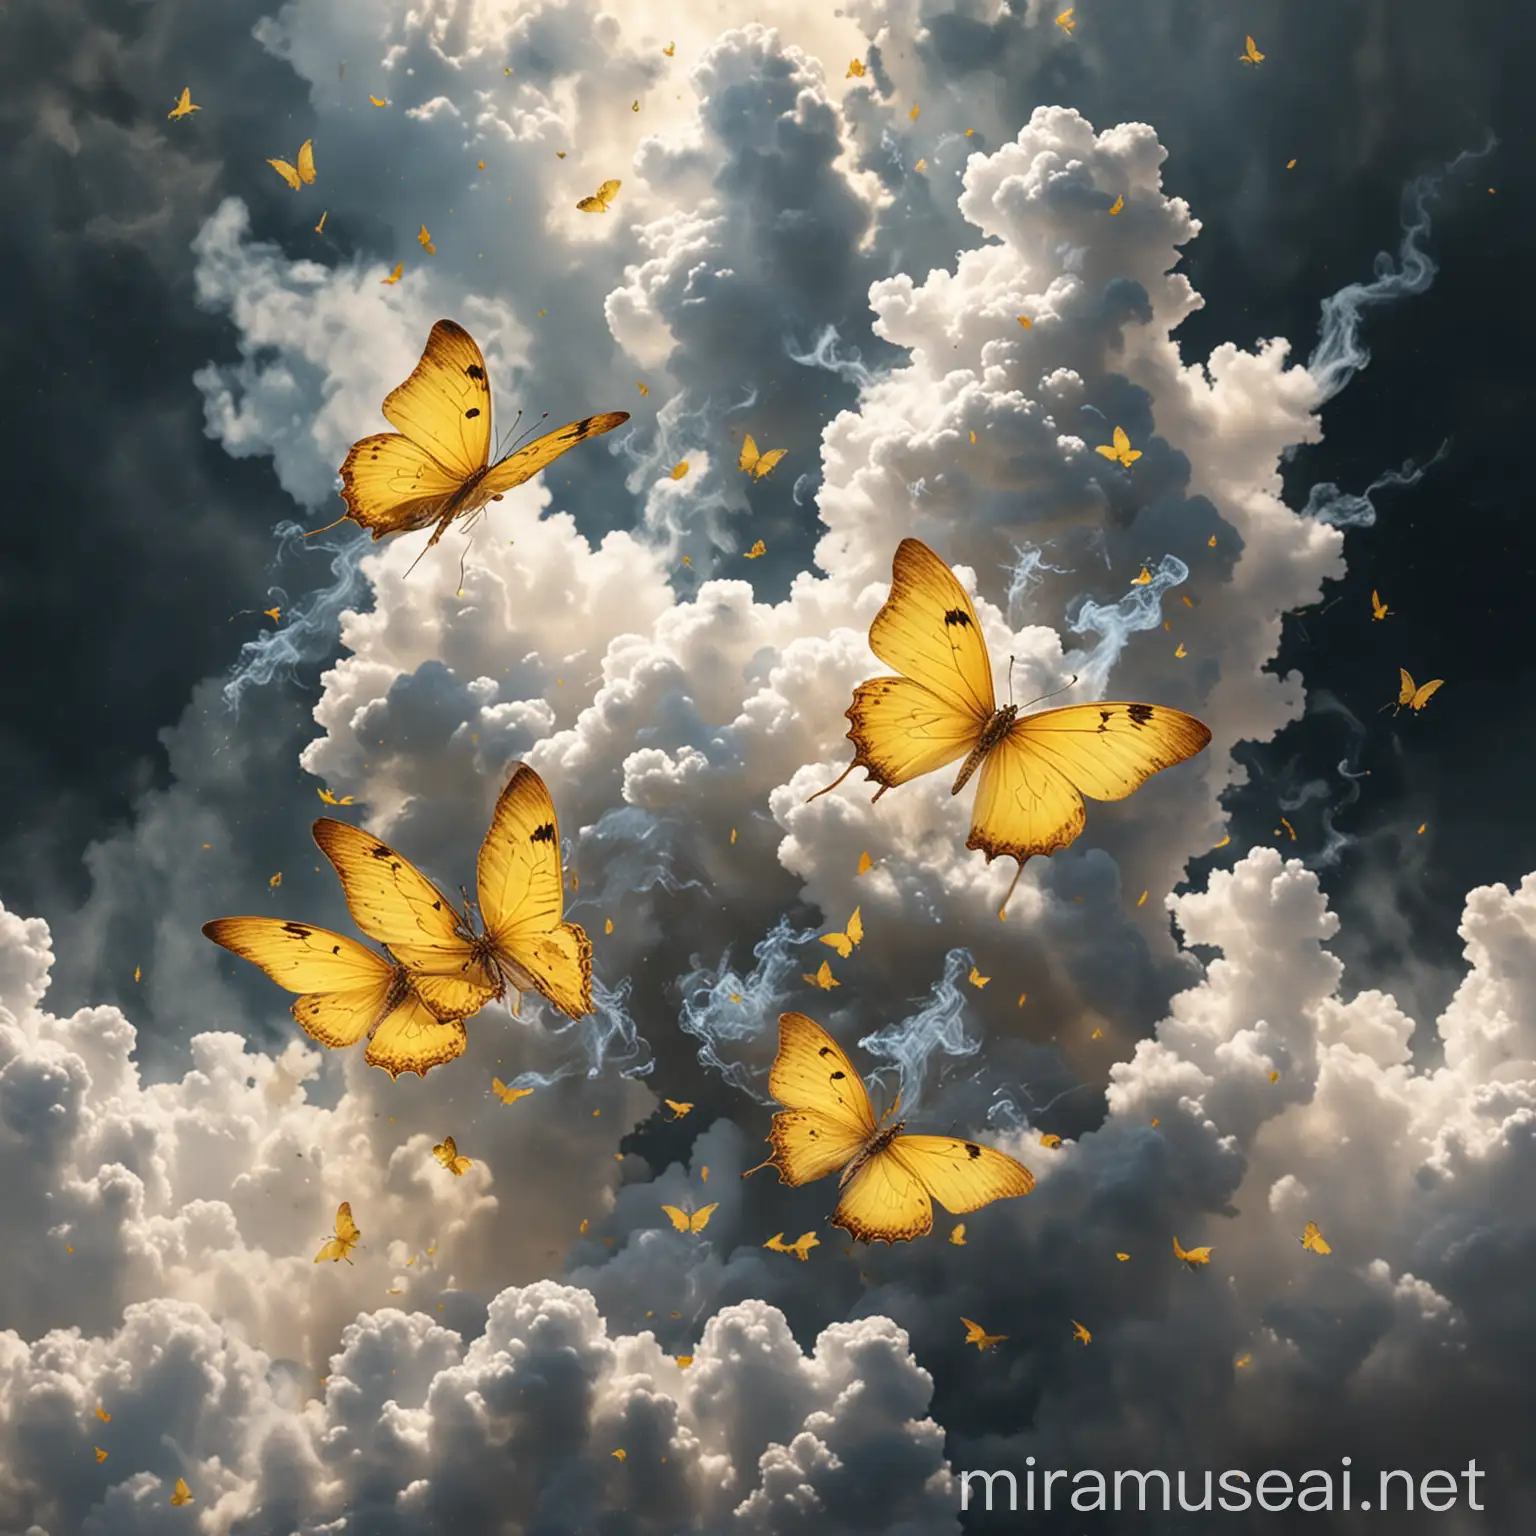 yellow butterflies smokin and relaxing in the cloud, and sybaritic